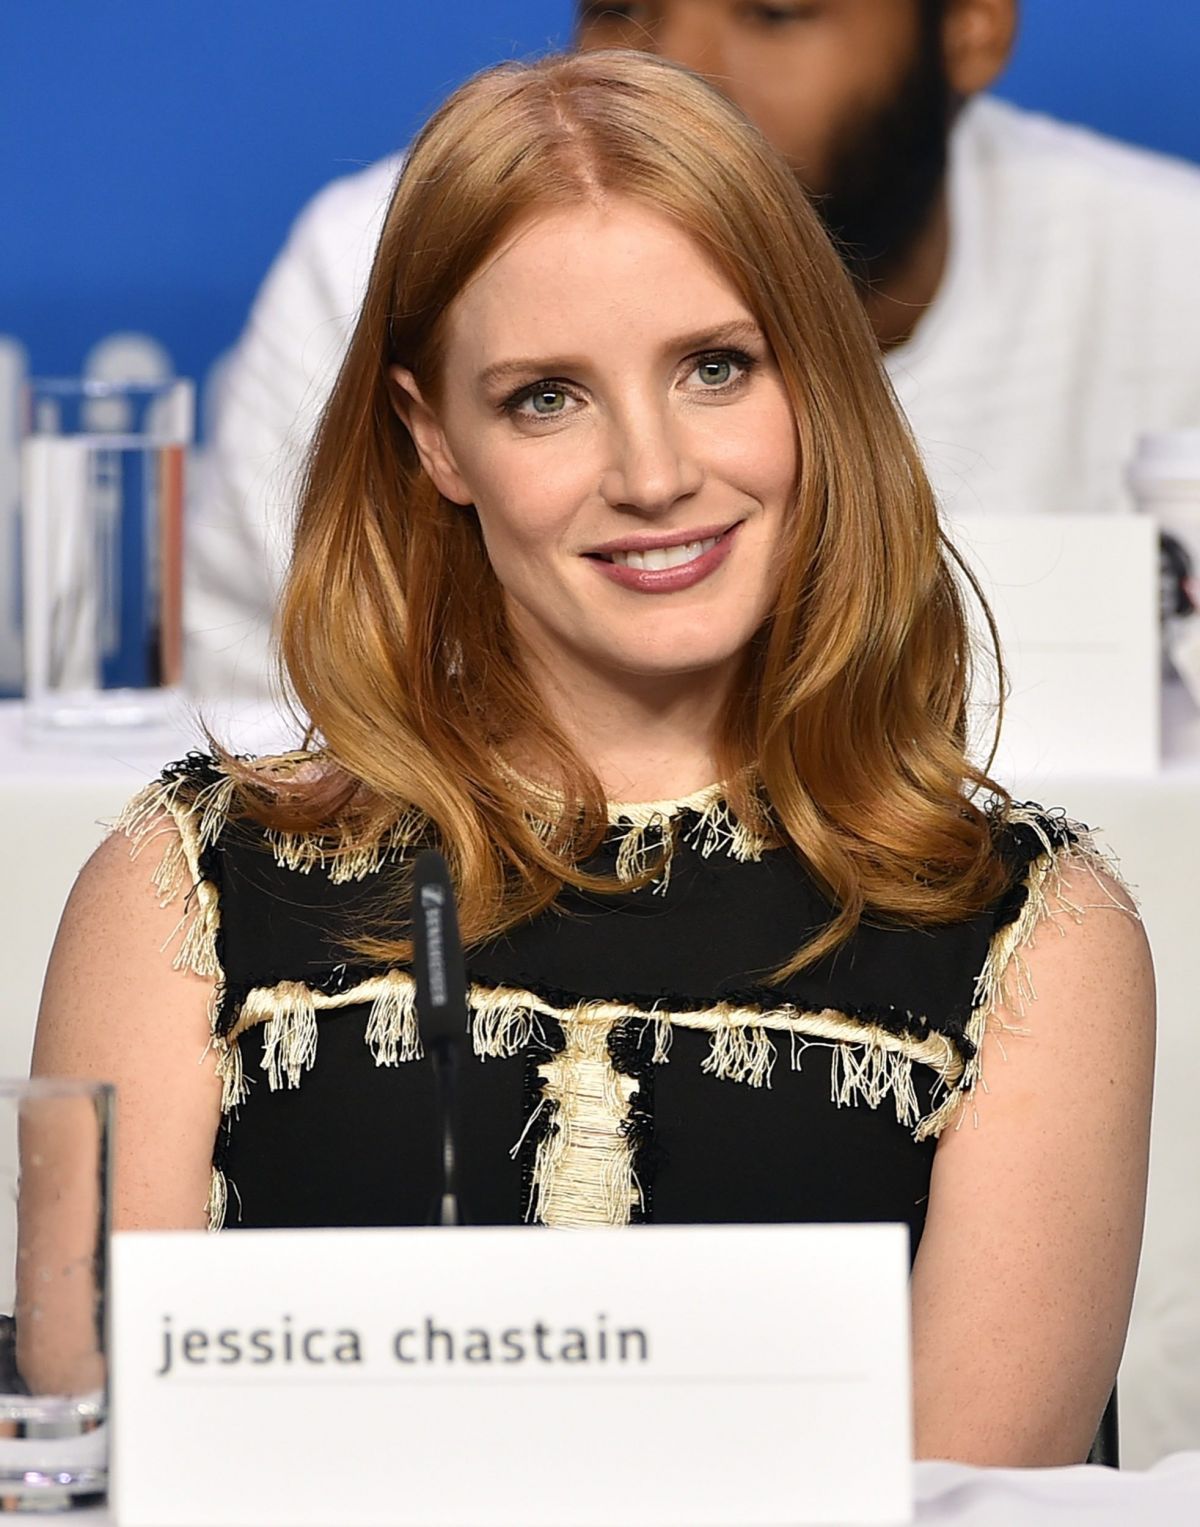 JESSICA CHASTAIN at The Martian Press Conference at 2015 TIFF 09/11/2015.